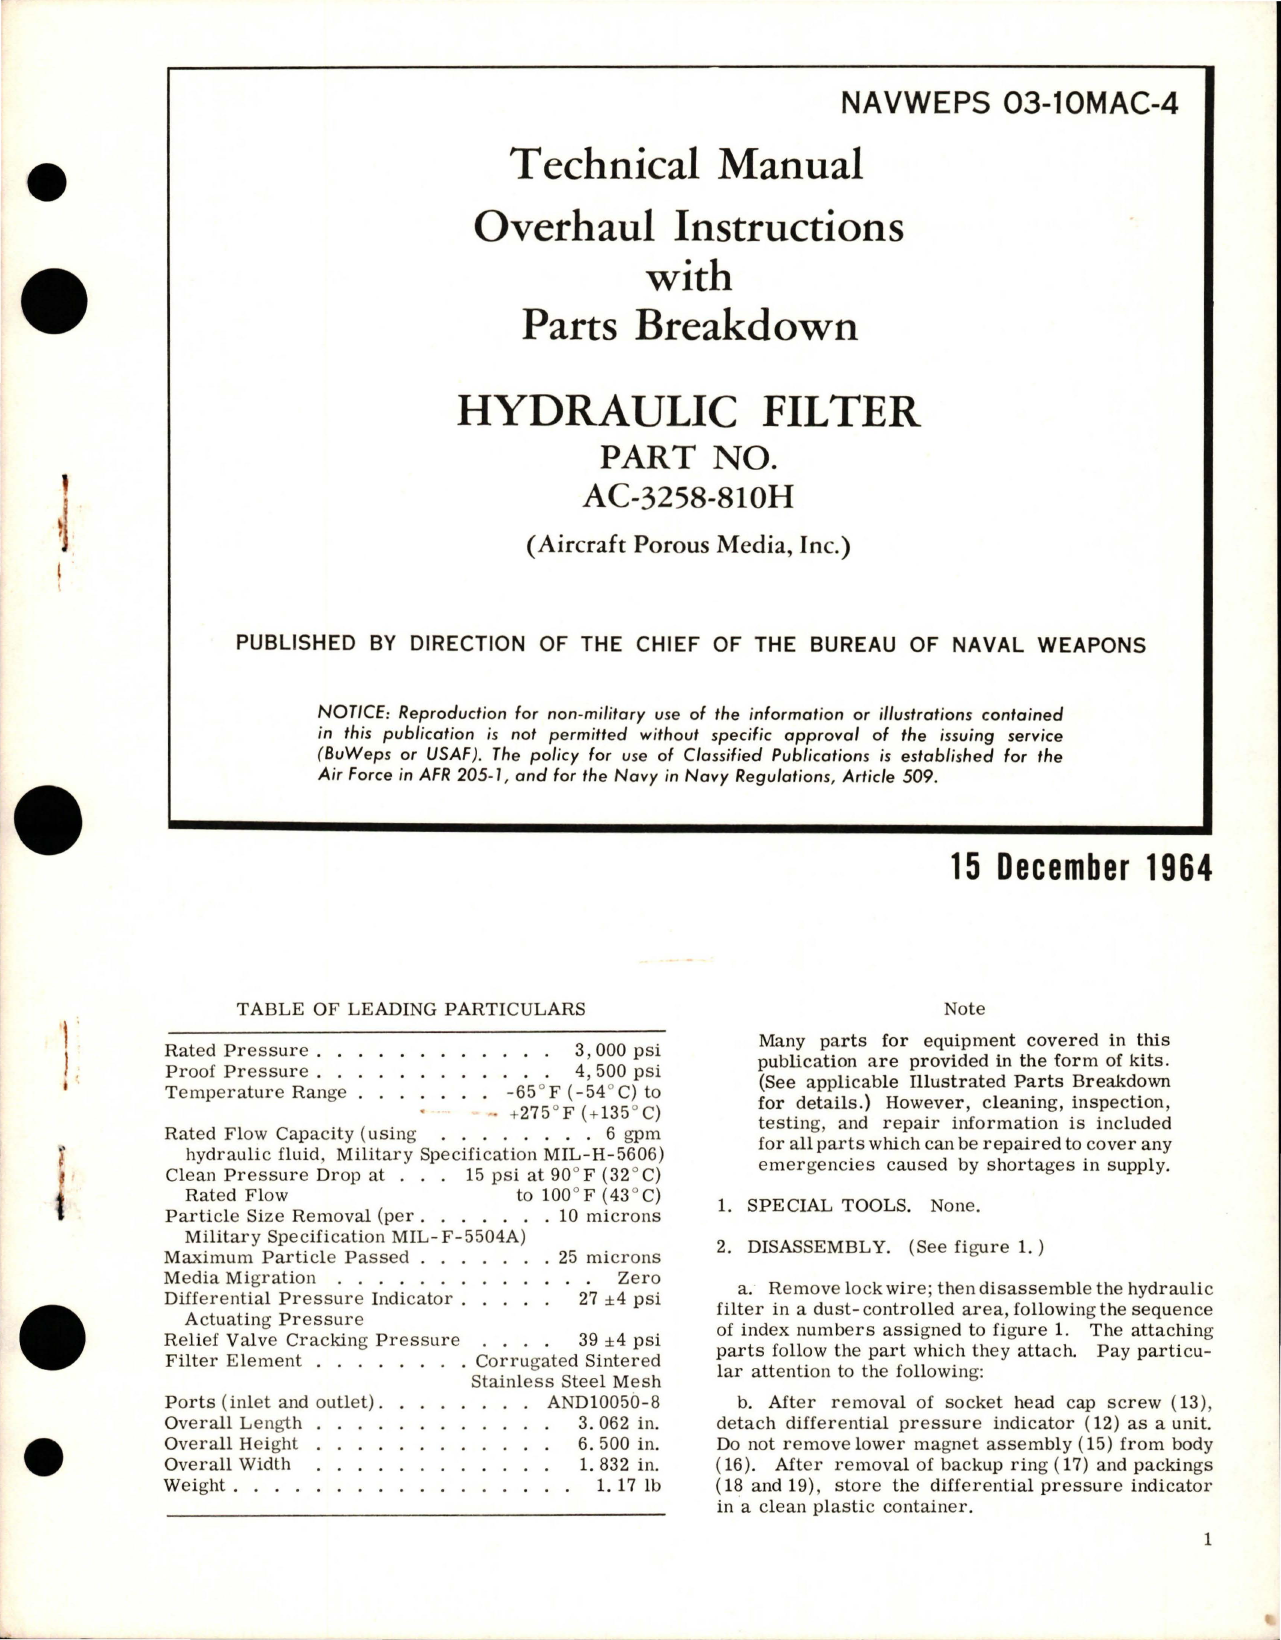 Sample page 1 from AirCorps Library document: Overhaul Instructions with Parts Breakdown for Hydraulic Filter - Part AC-3258-810H